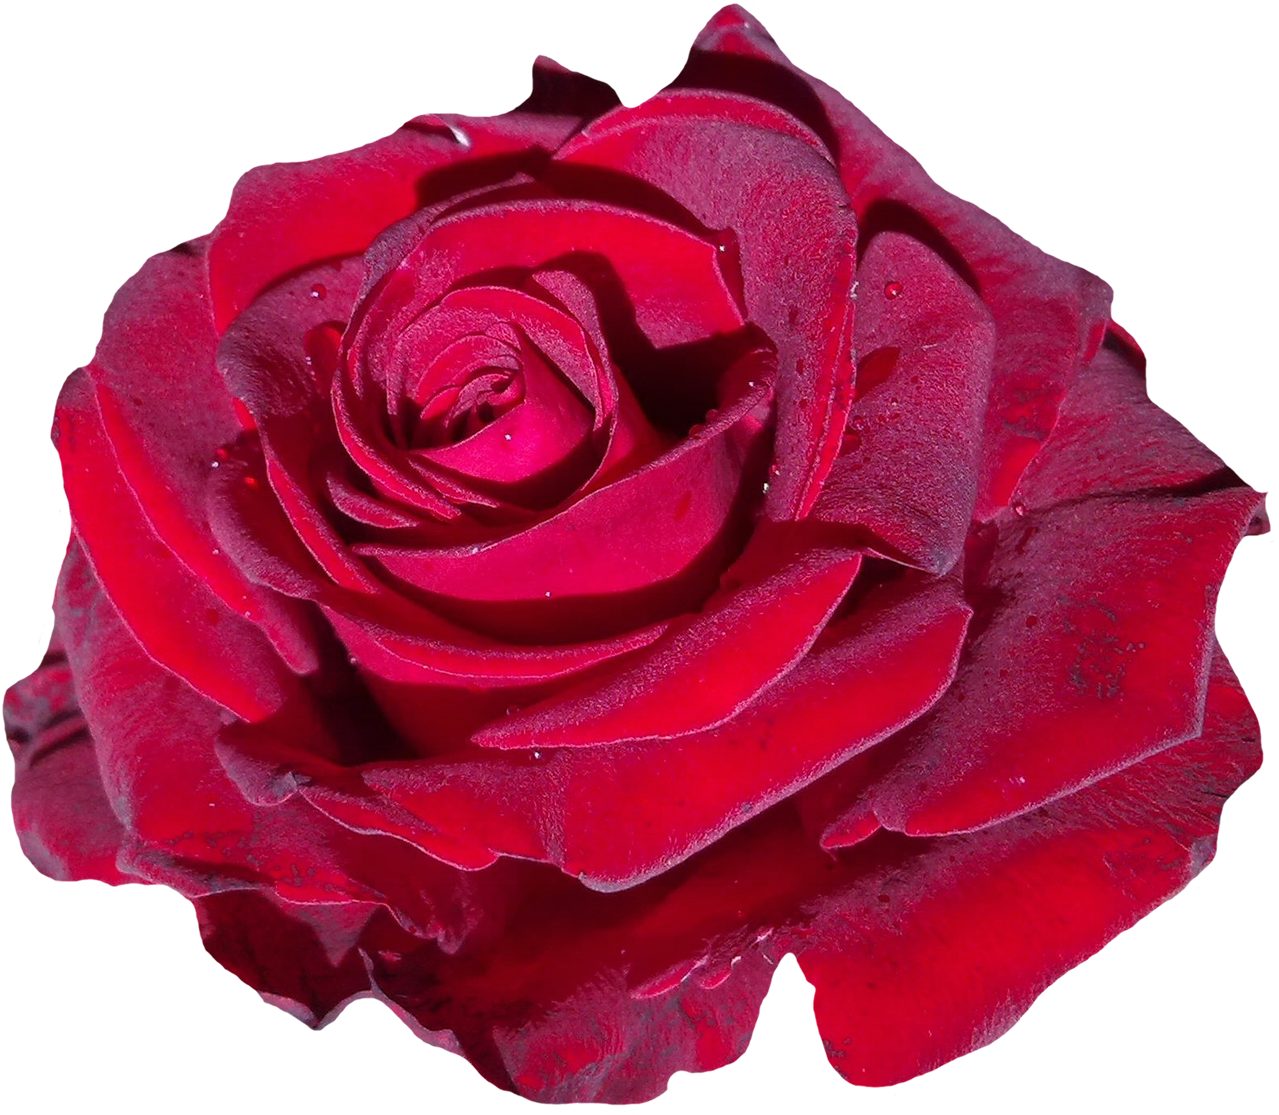 Red Rose Flower Png Image - Portable Network Graphics (1400x1222)